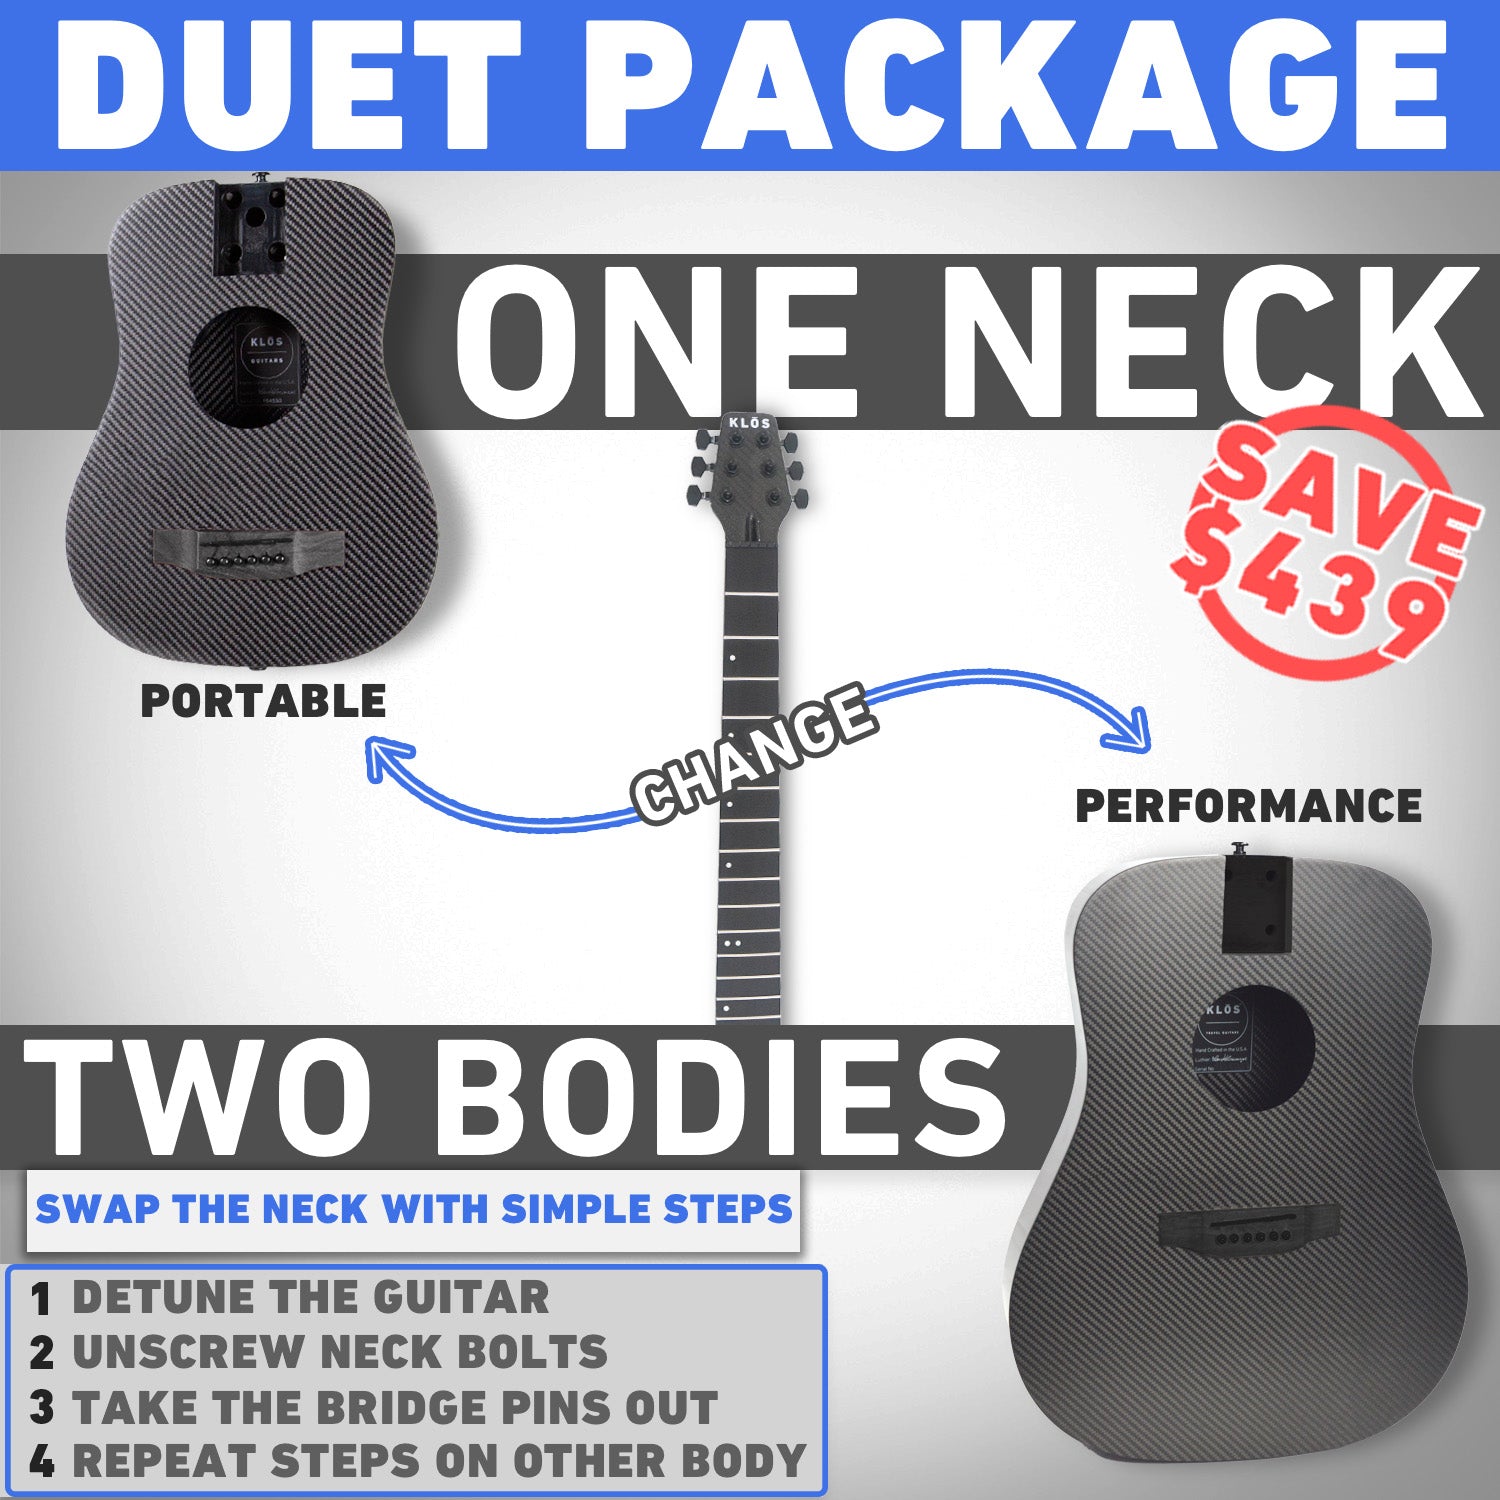 Nab the duet package and save $439. One neck, two bodies